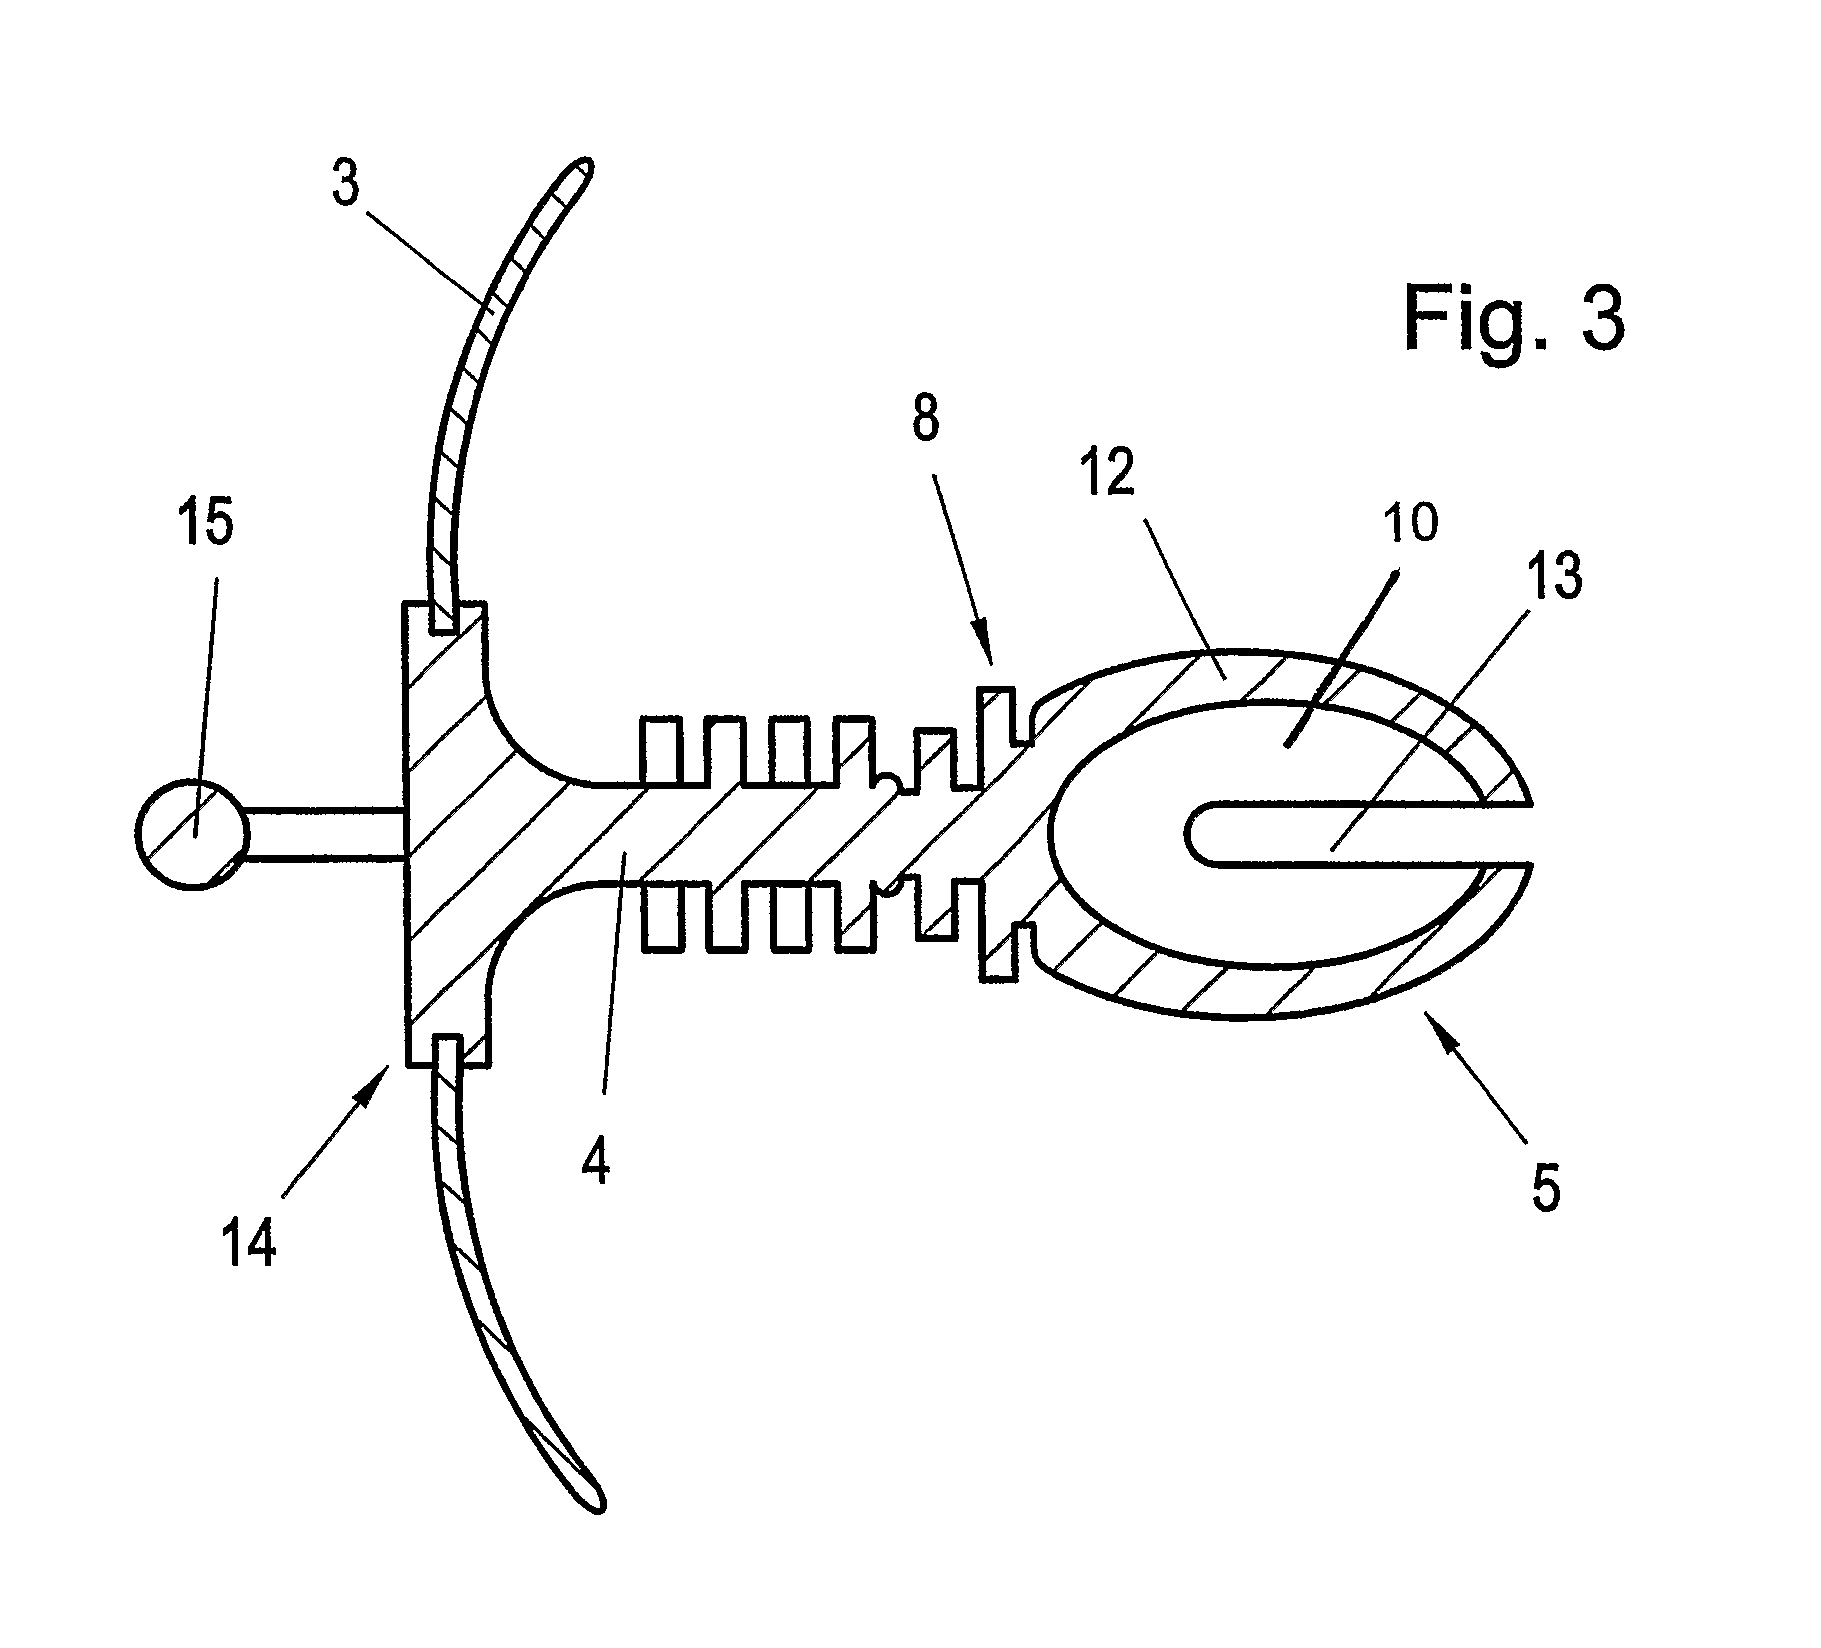 Teeth cleaning pacifier having a convex teat body